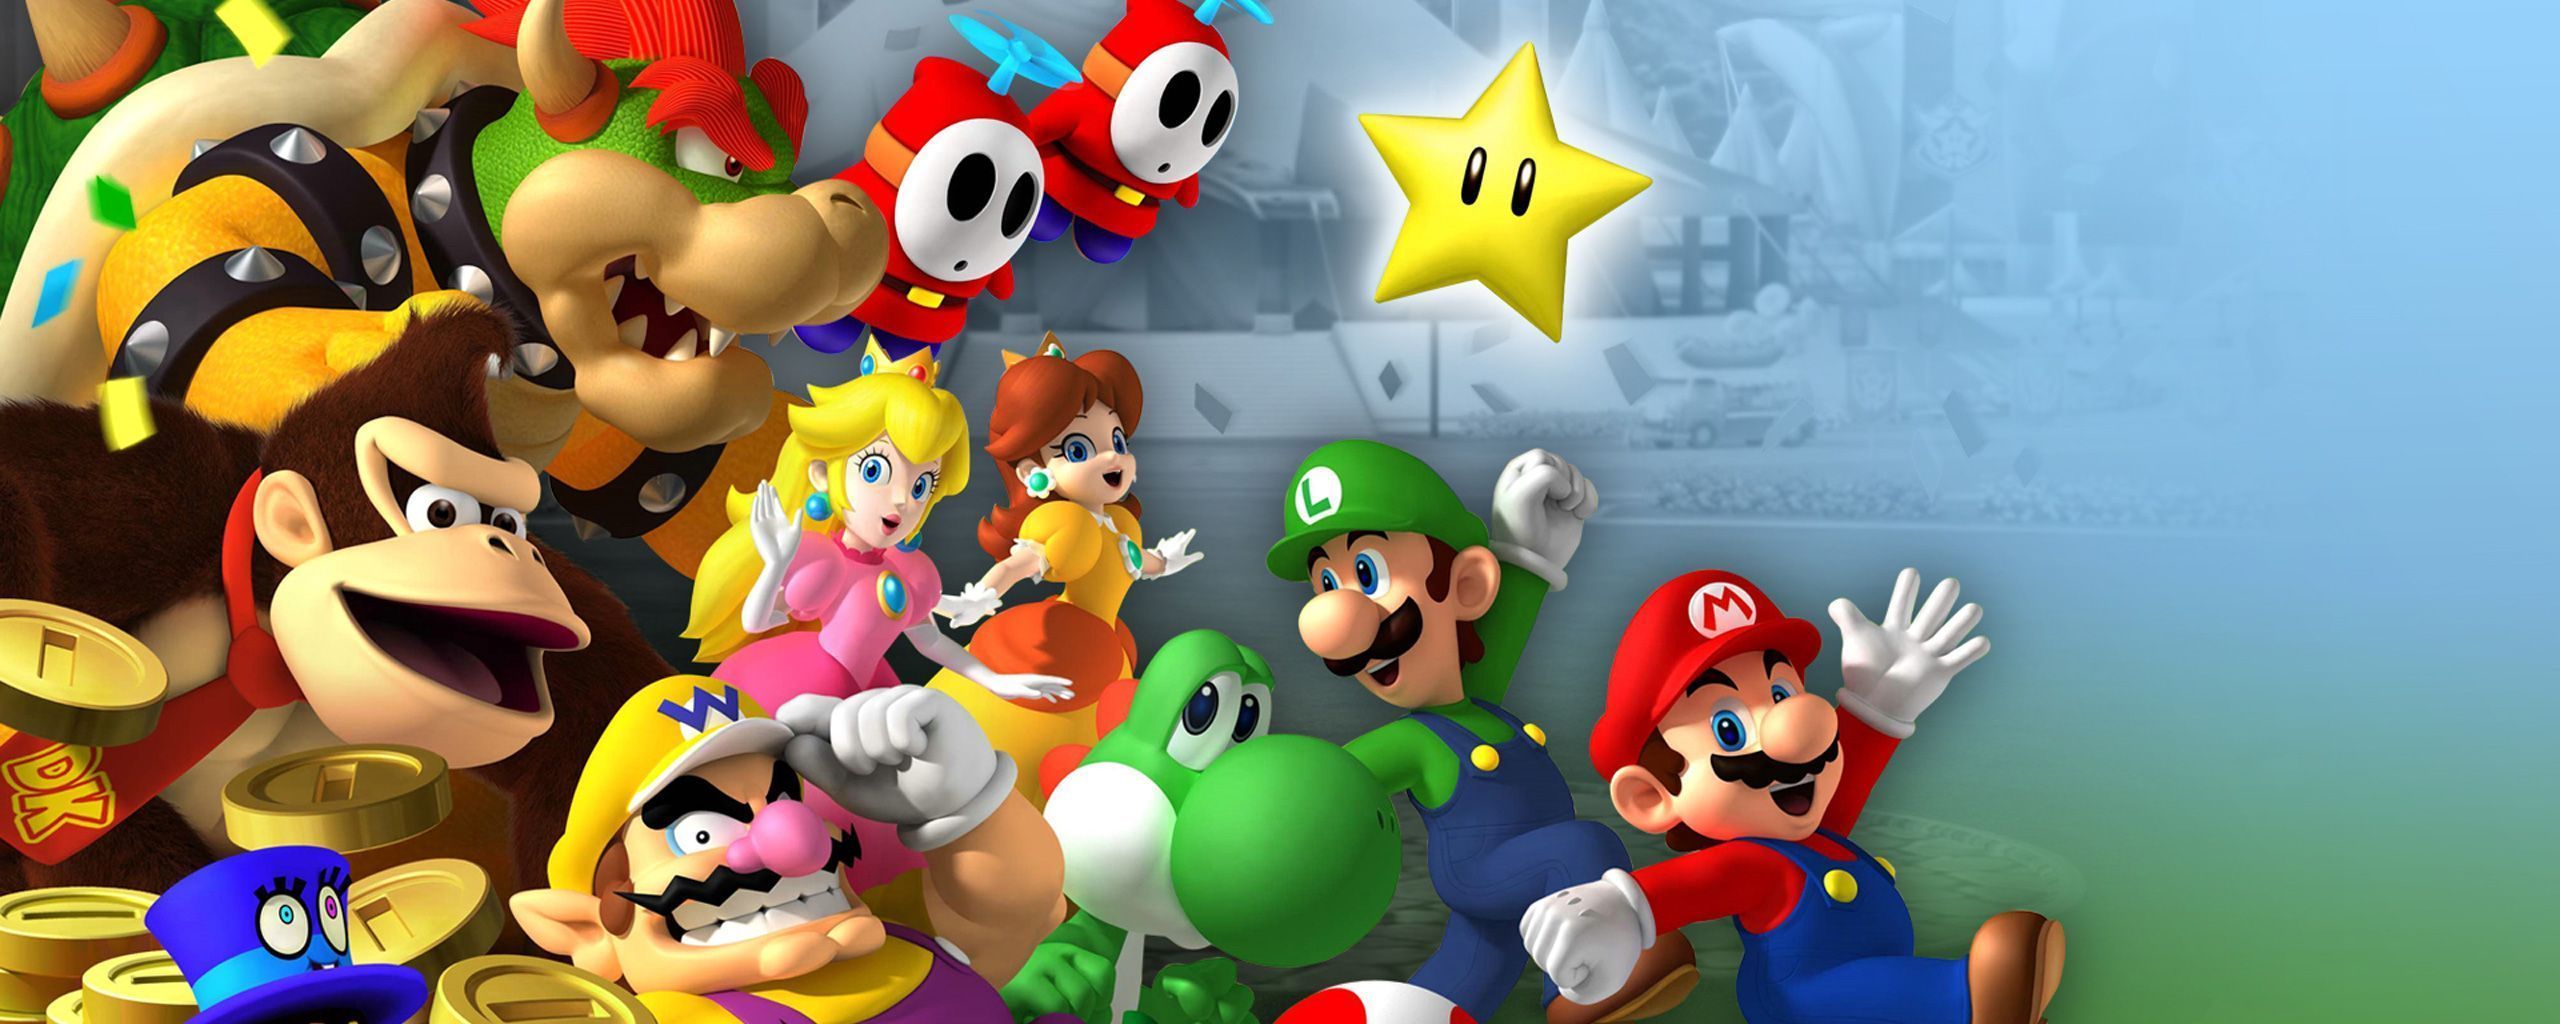 262 Mario HD Wallpapers | Backgrounds - Wallpaper Abyss - Page 5